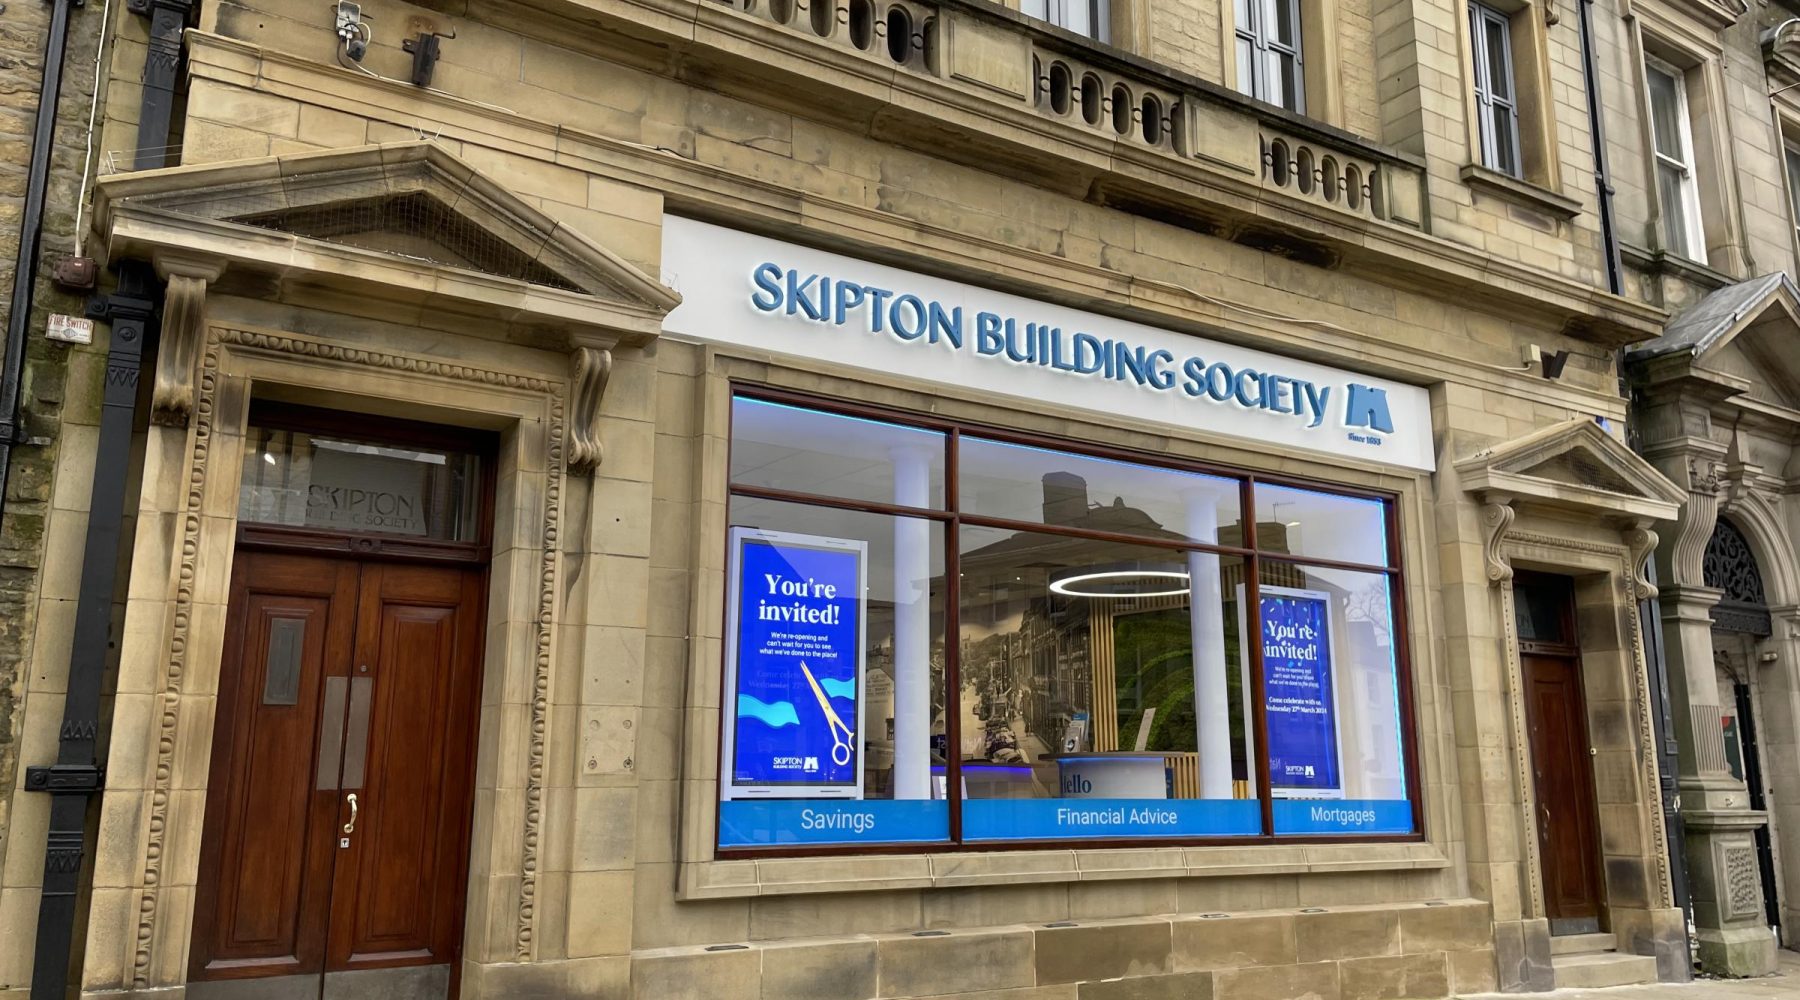 Building society back home in state-of-the-art premises